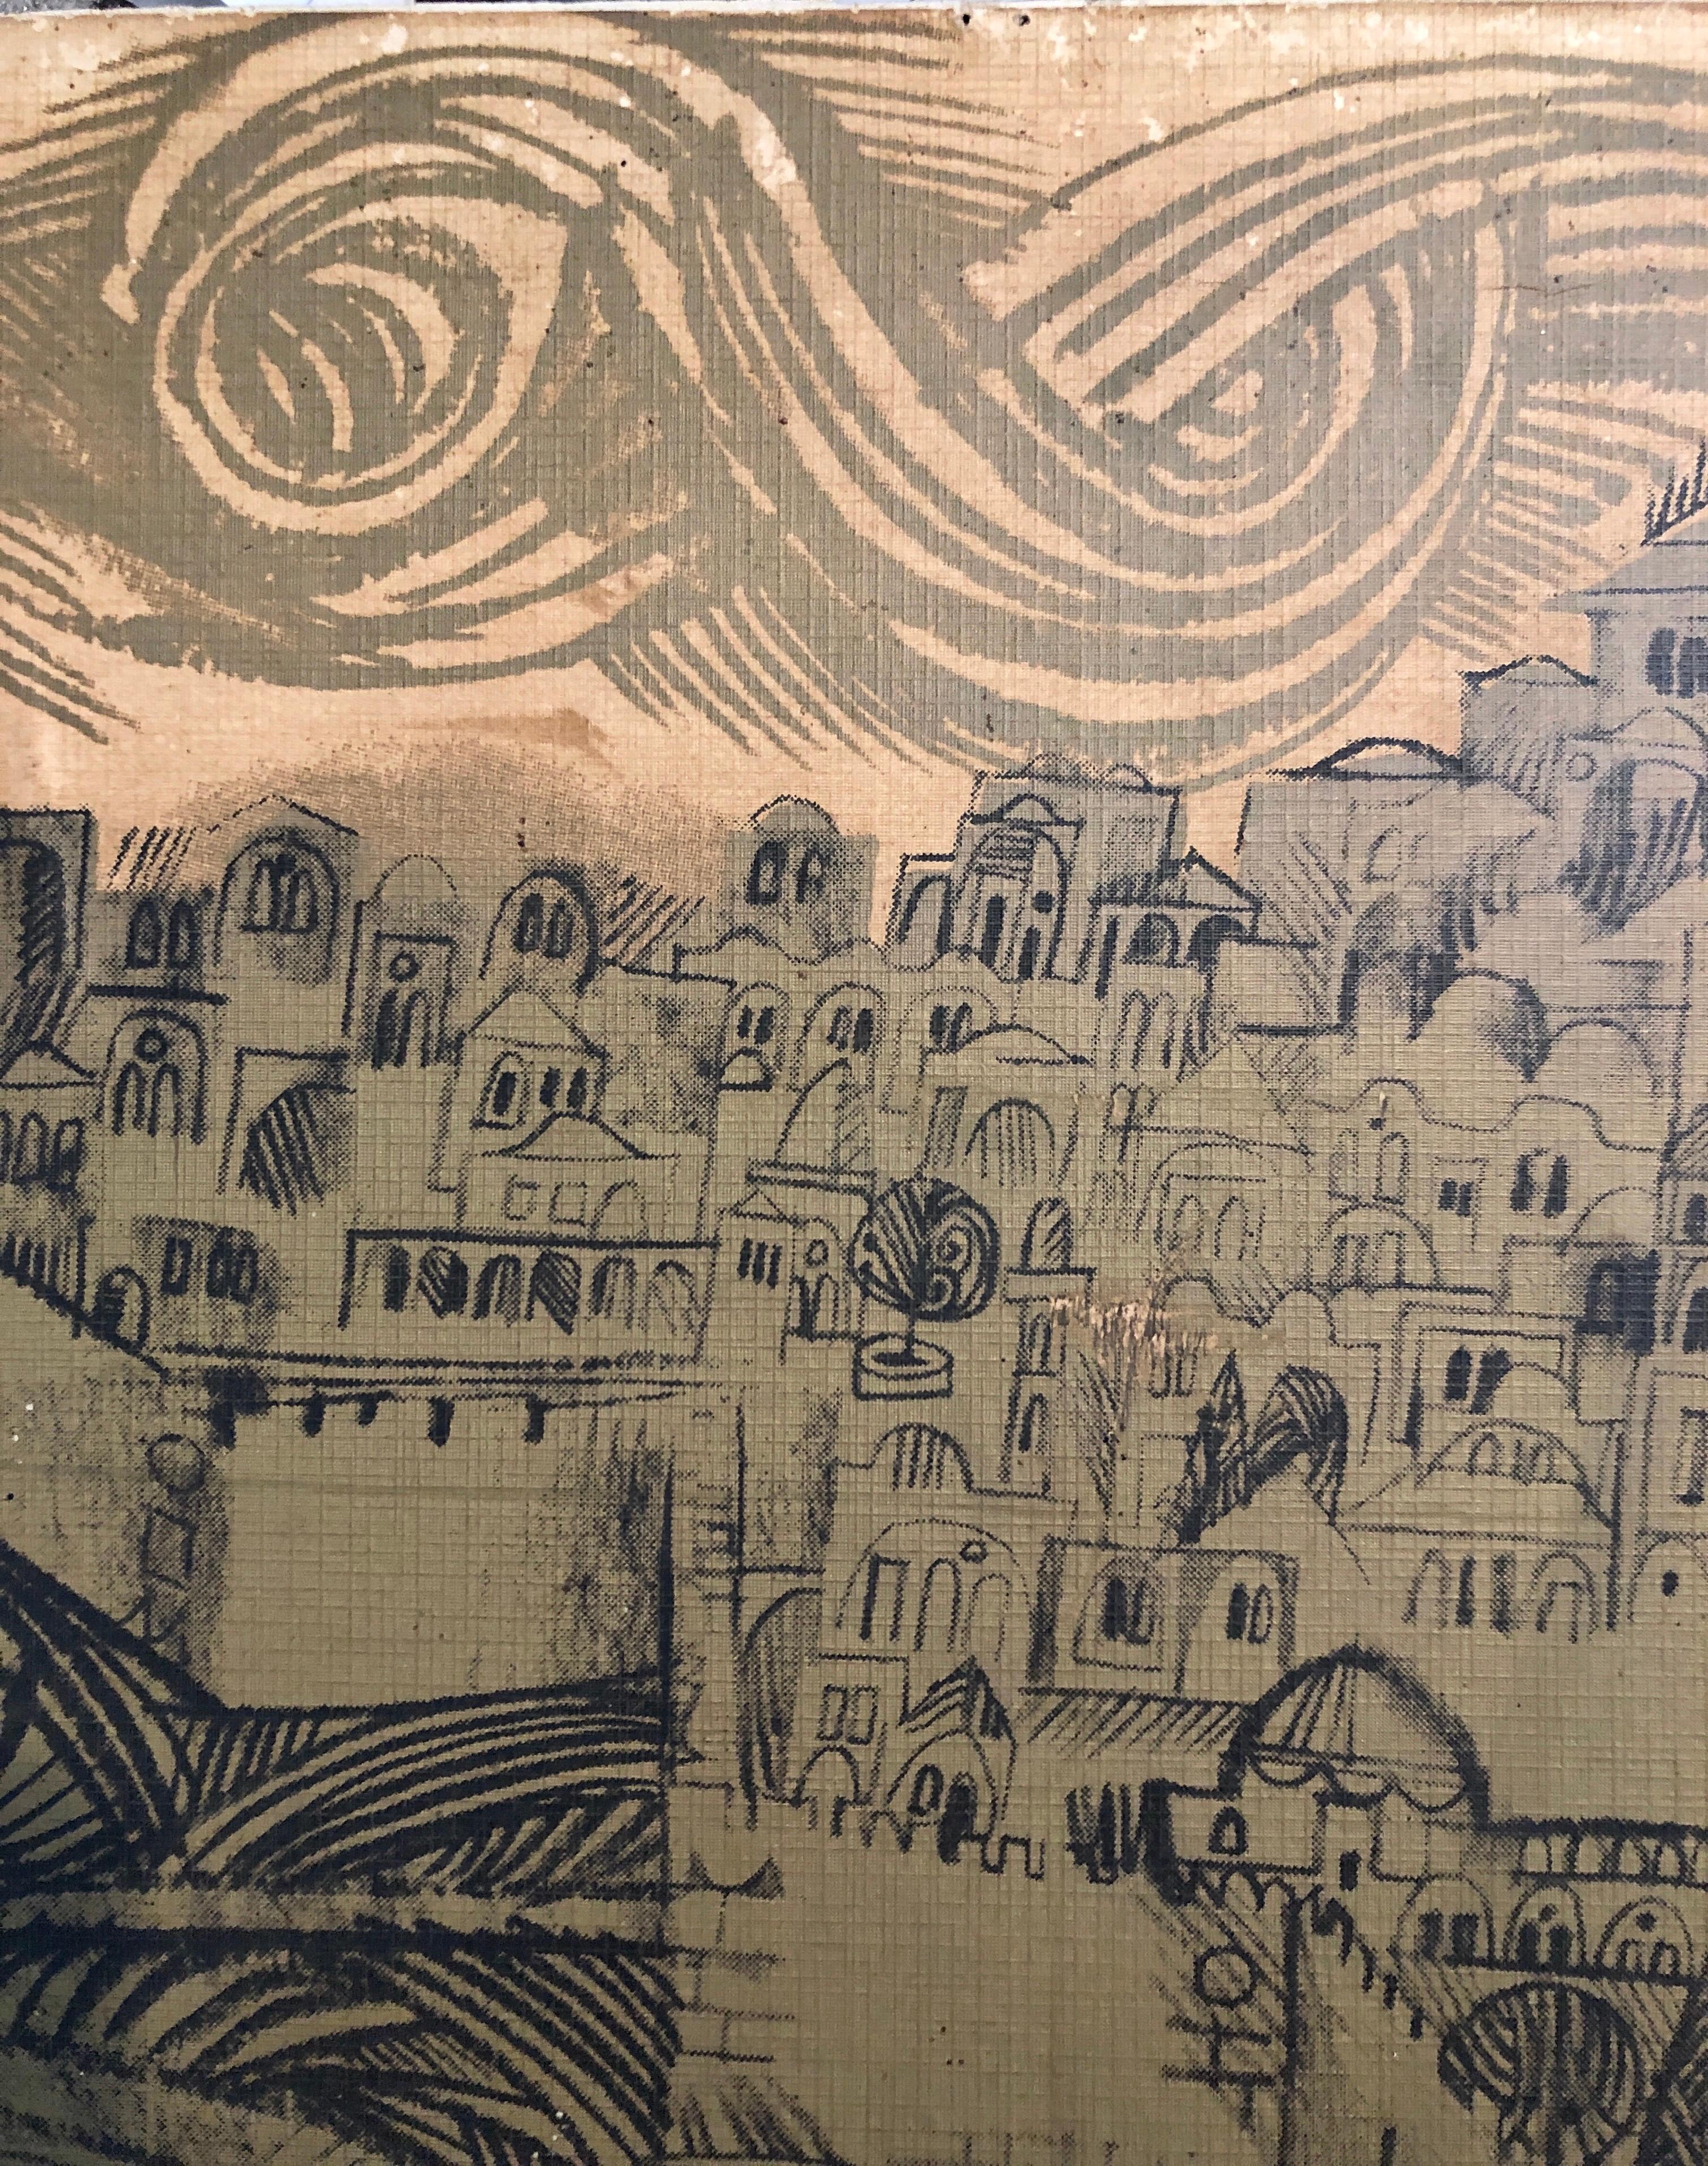 Vintage 1970s graphic art poster print of Jerusalem by Eliezer Weishoff, printed in Israel by Shohar Print House. Black, white and gold. Silkscreen on heavy paper mounted to wood panel.

Printed artist signature.Eliezer Weishoff (Hebrew: אליעזר